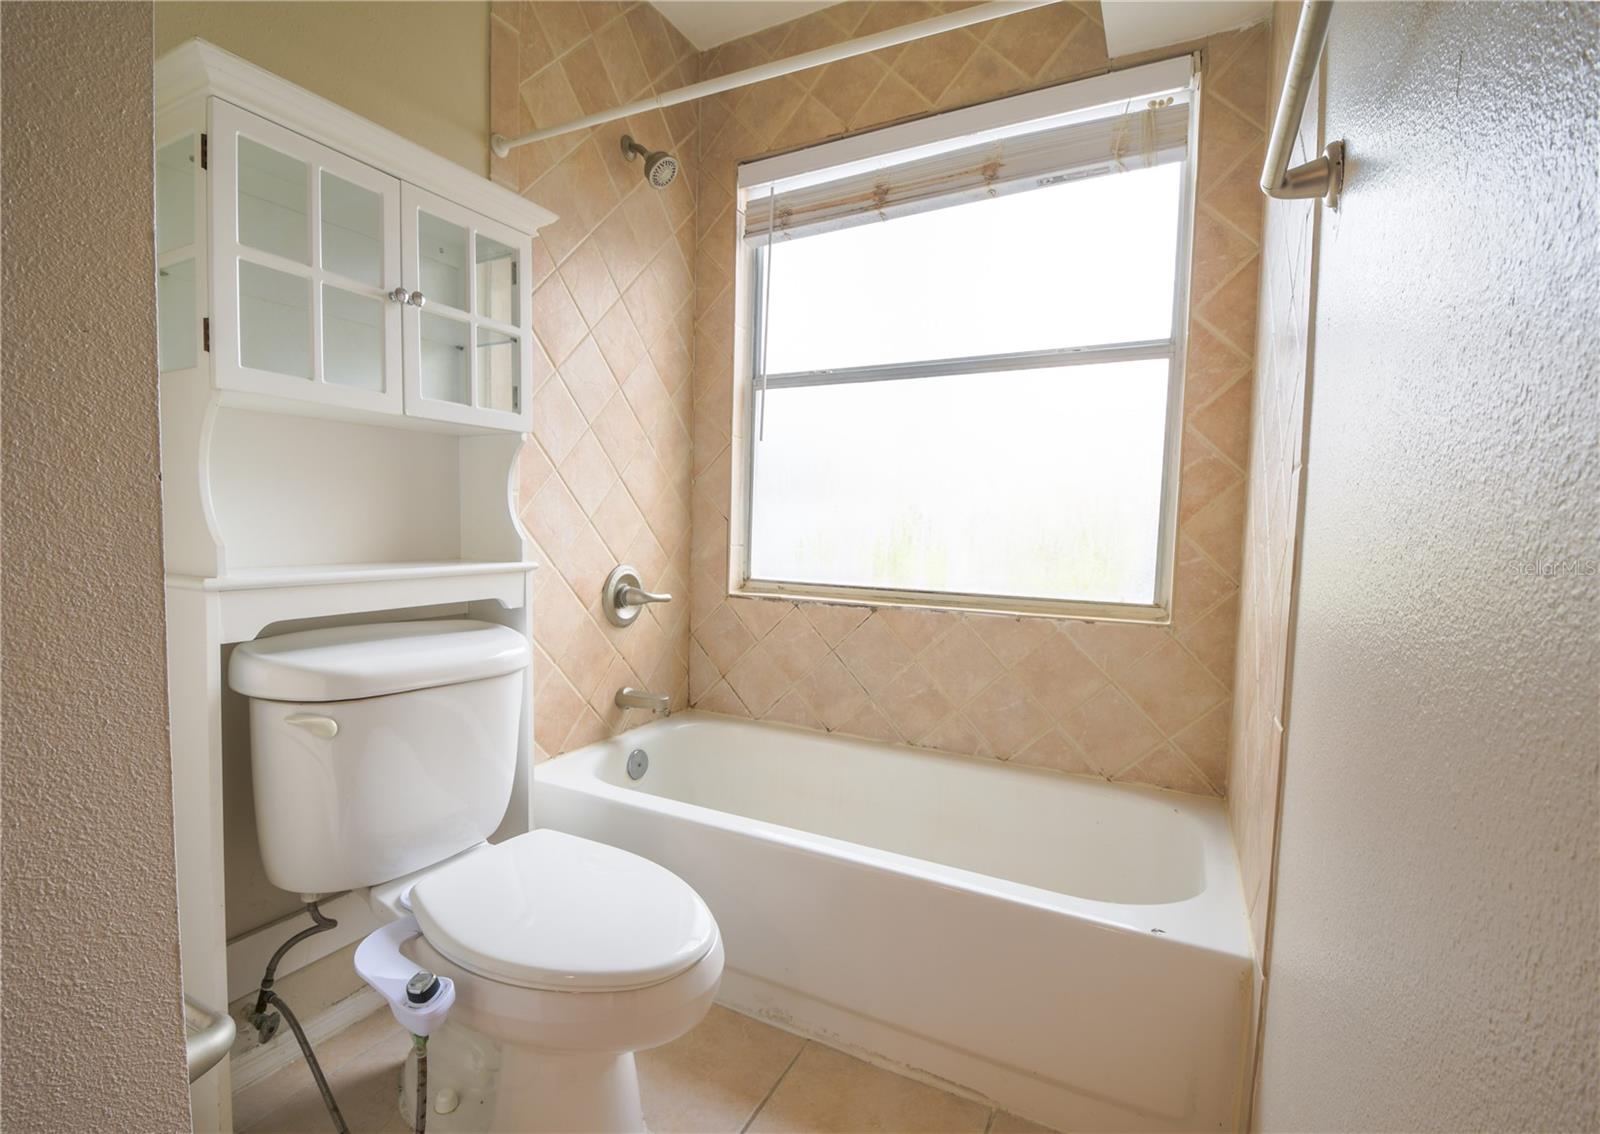 The primary bathroom features a tub with shower.